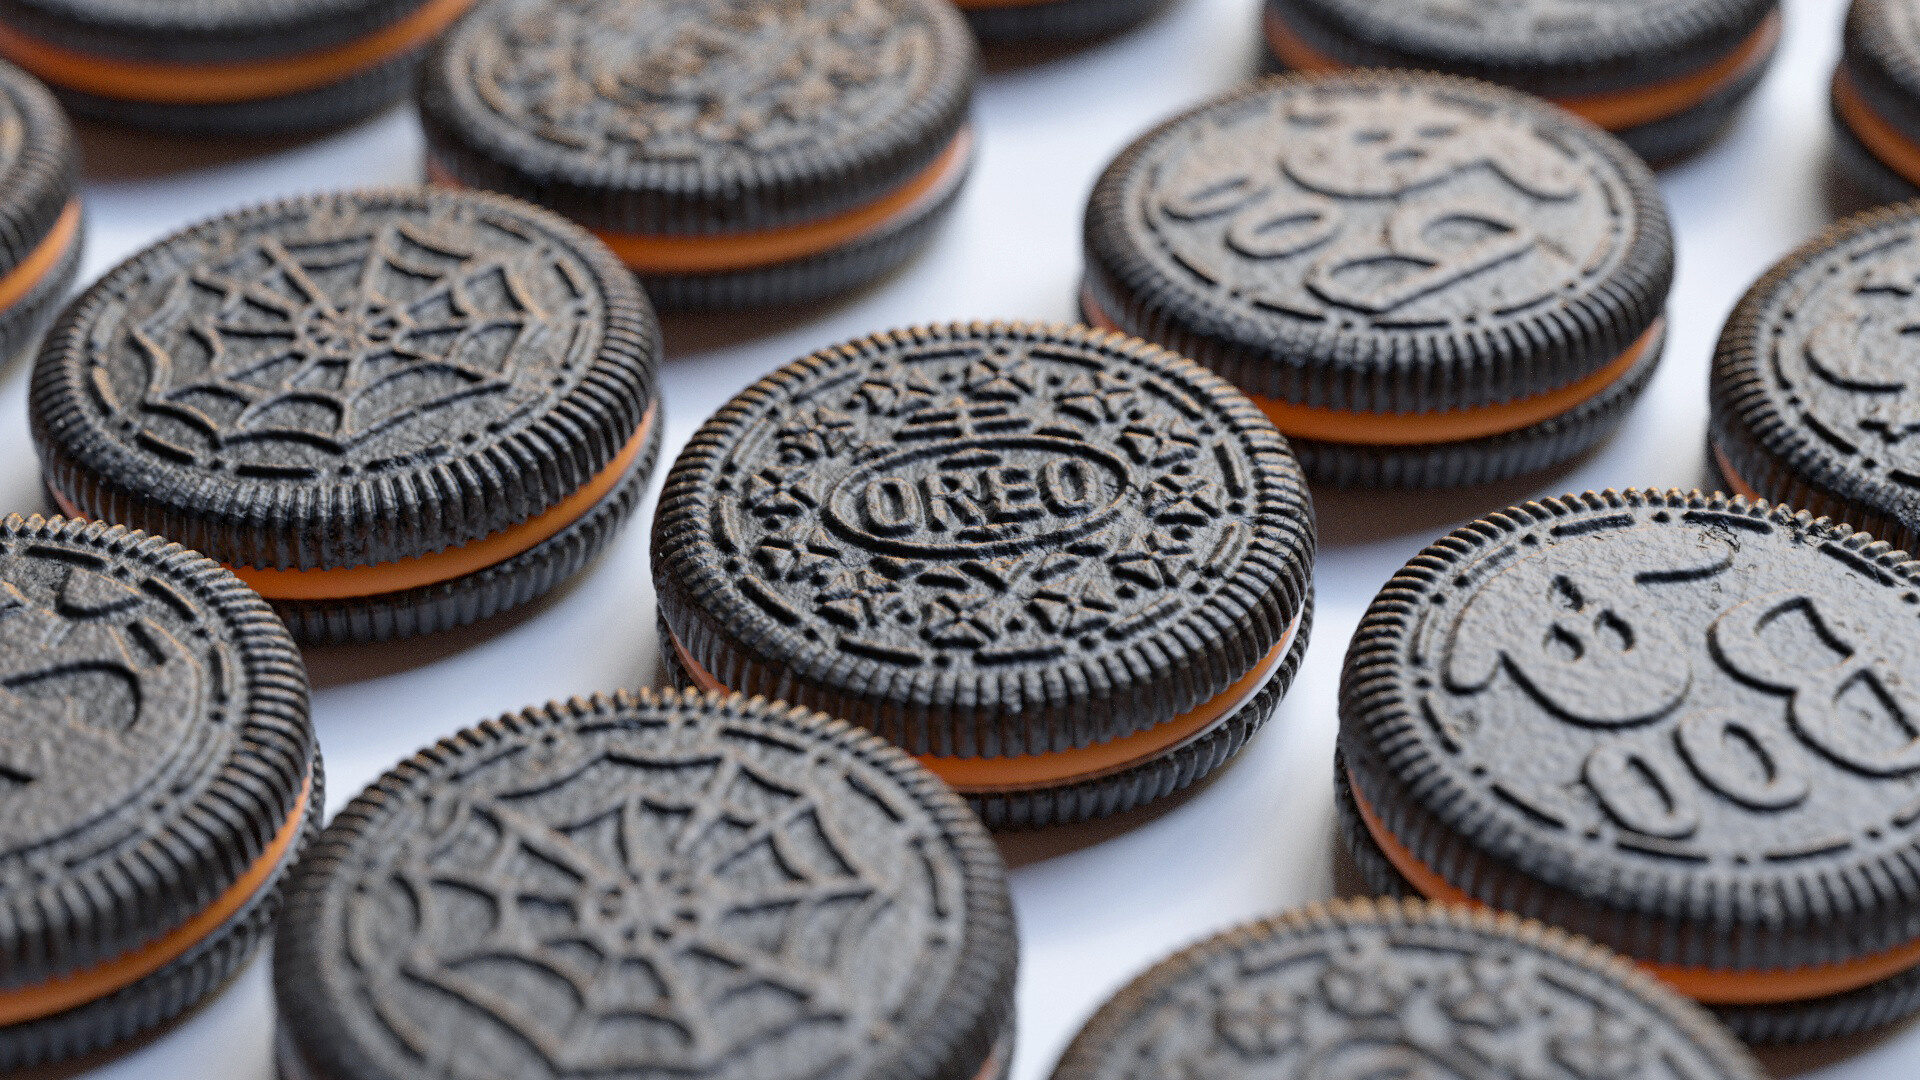 Oreo Cookies: Originally produced by Nabisco in New York City in 1912. 1920x1080 Full HD Background.